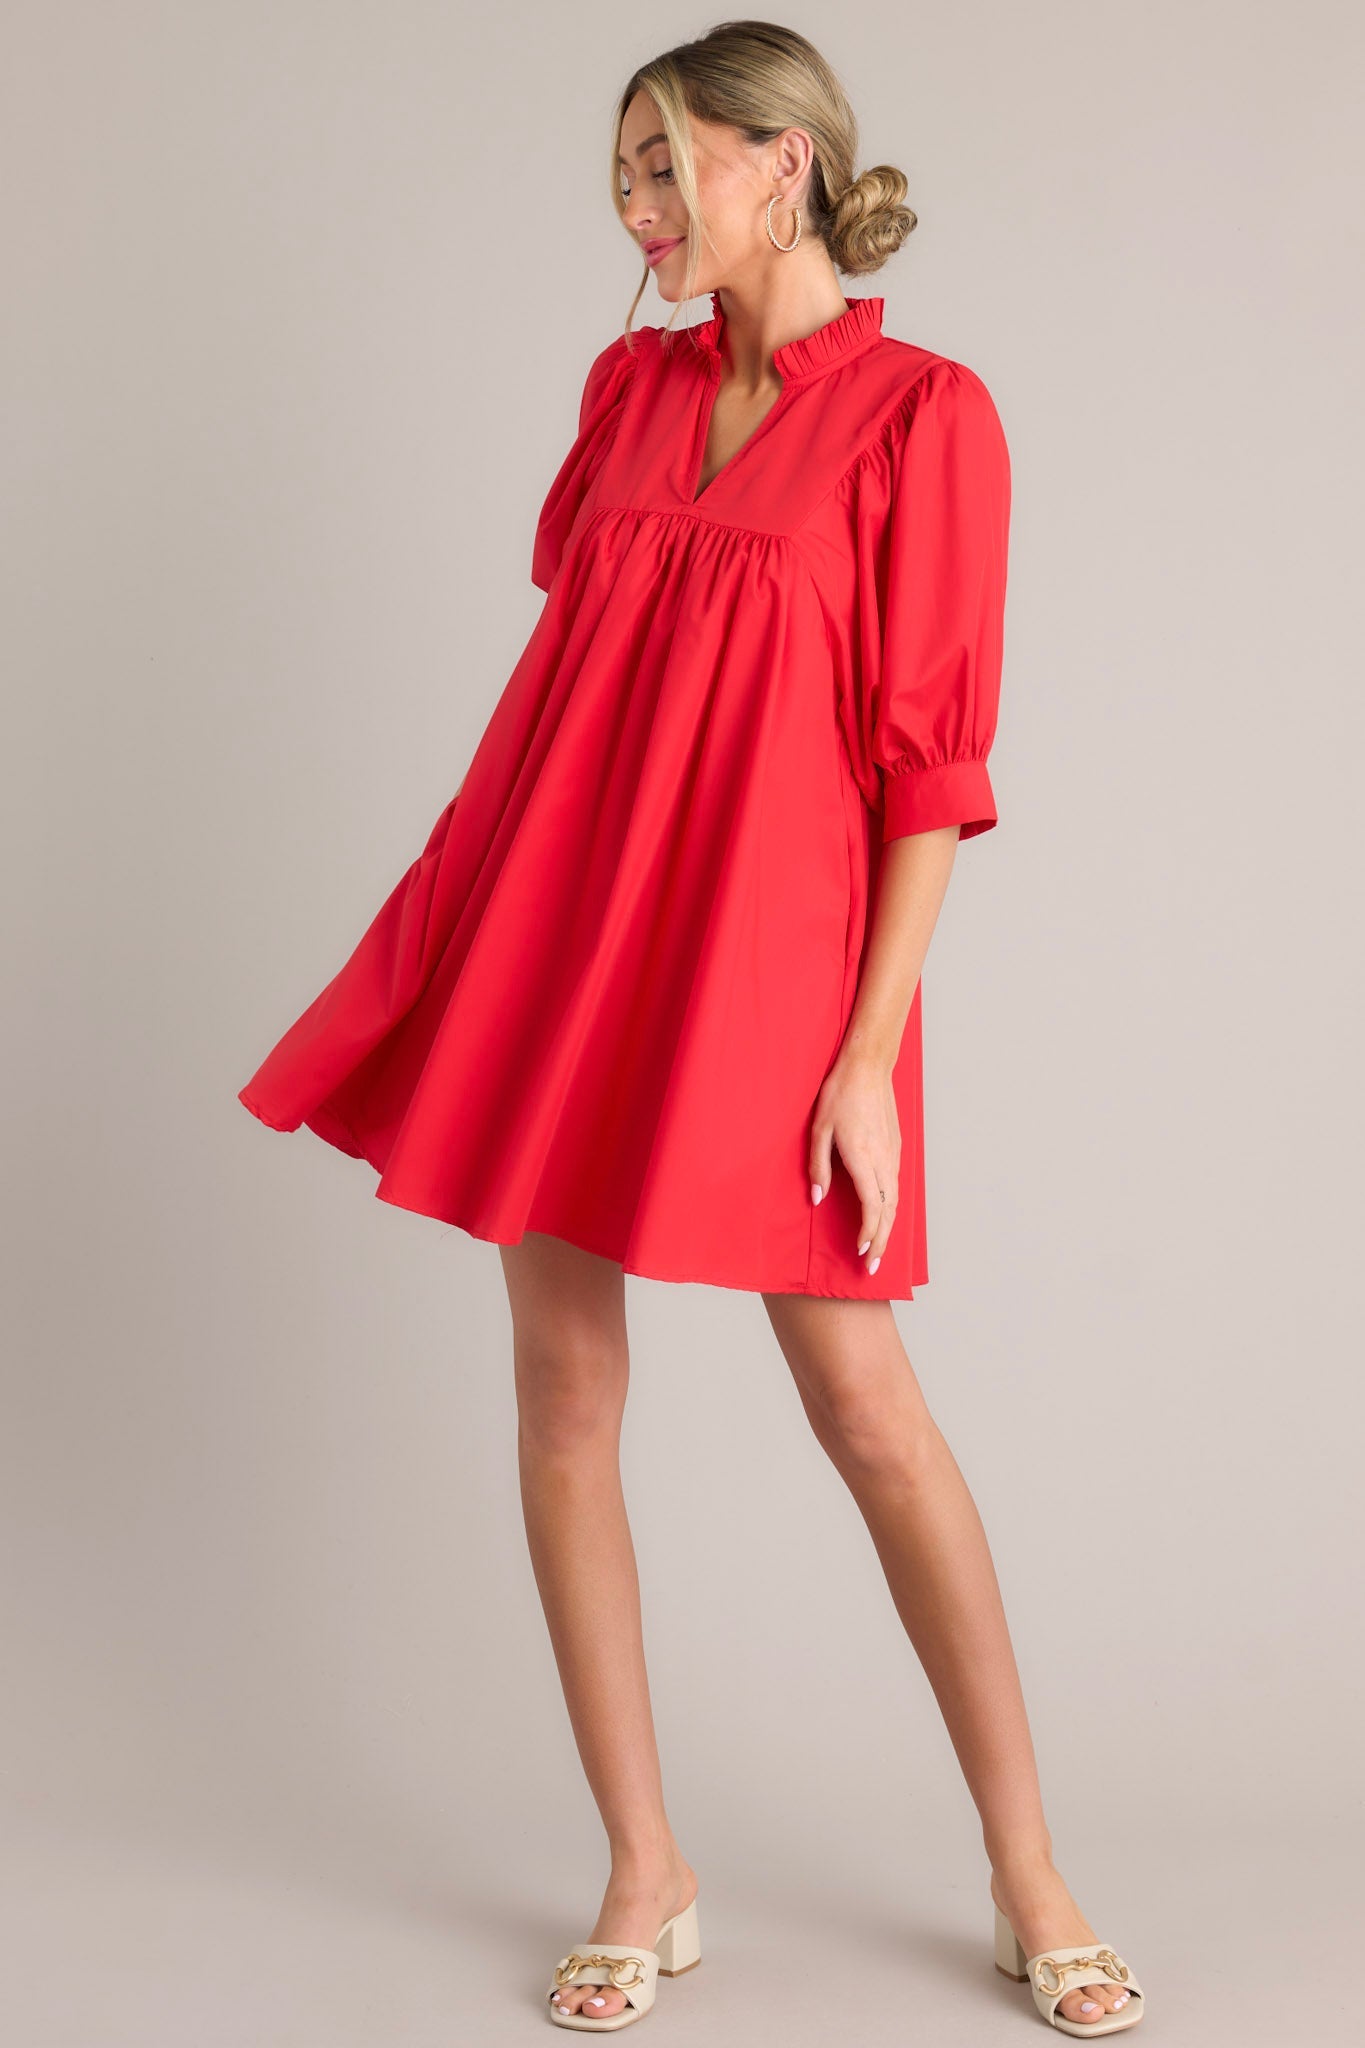 Side view of this red mini dress that features a v-neckline, a ruffled faux collar, pleated detailing around the bust, functional hip pockets, and cuffed puff sleeves.